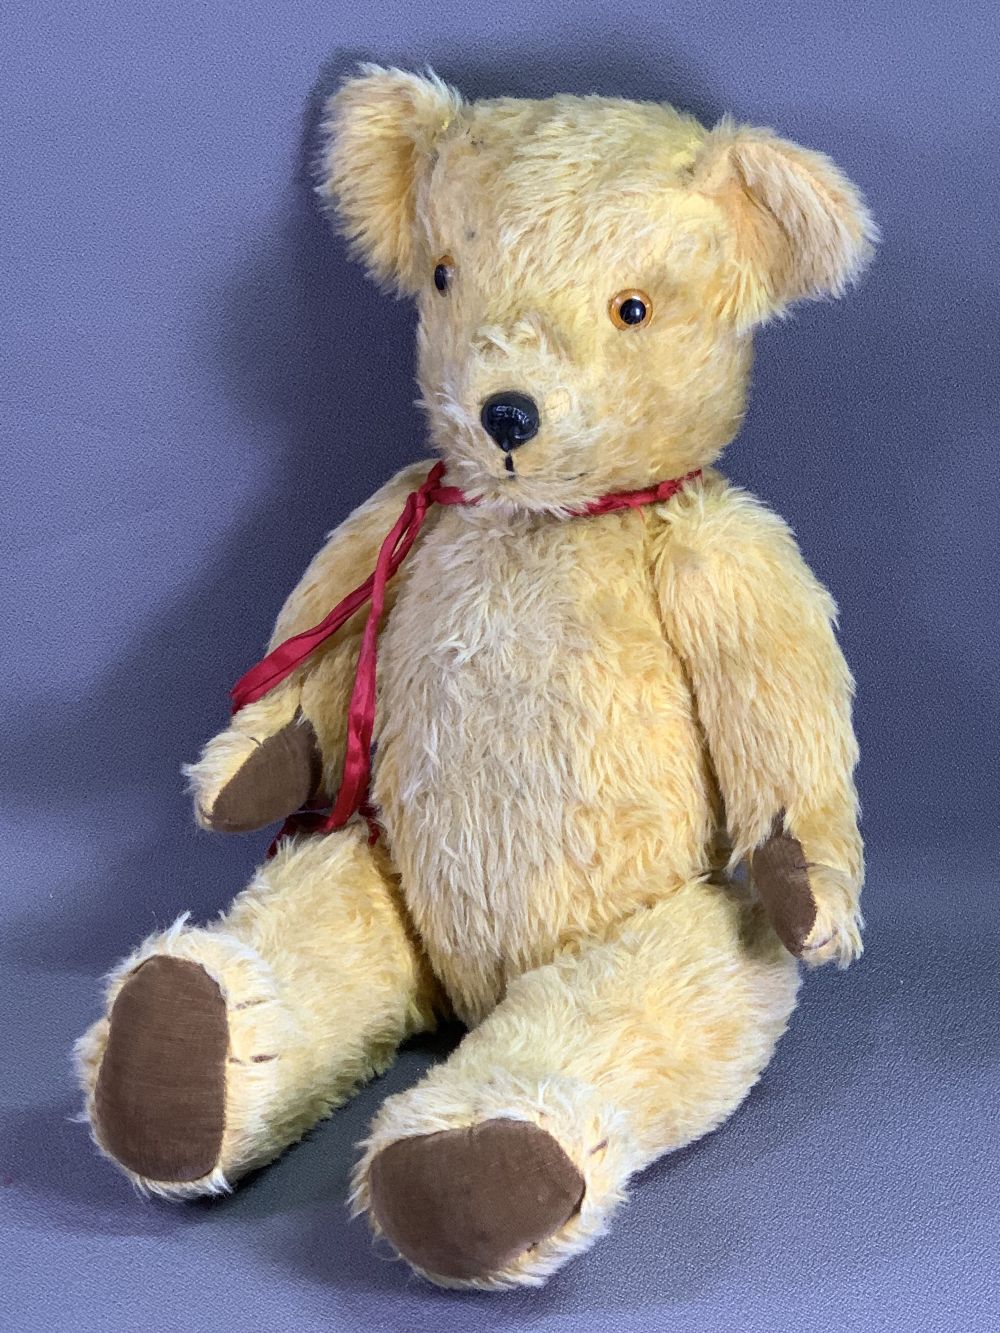 VINTAGE TEDDY BEAR - growler with glass?/plastic eyes and red bow, labelled 'Pedigree New